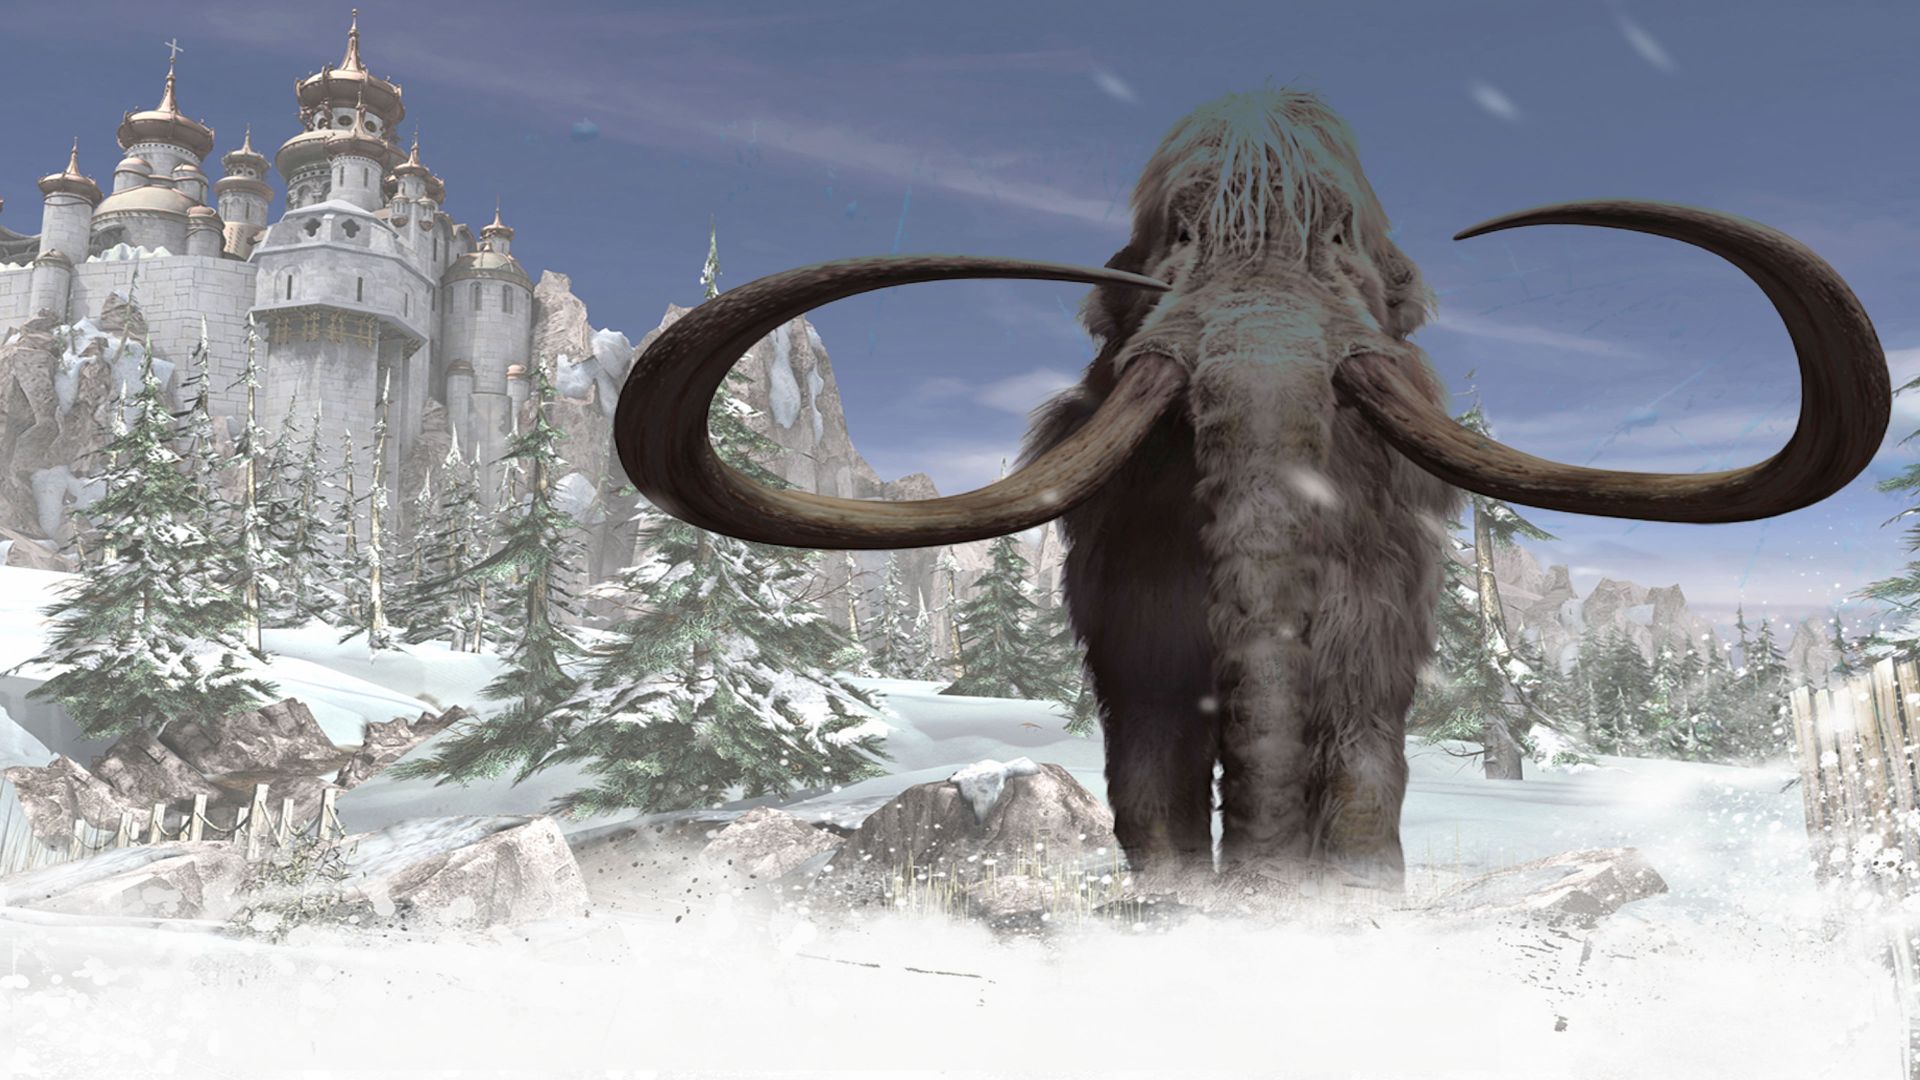 Syberia II technical specifications for computer